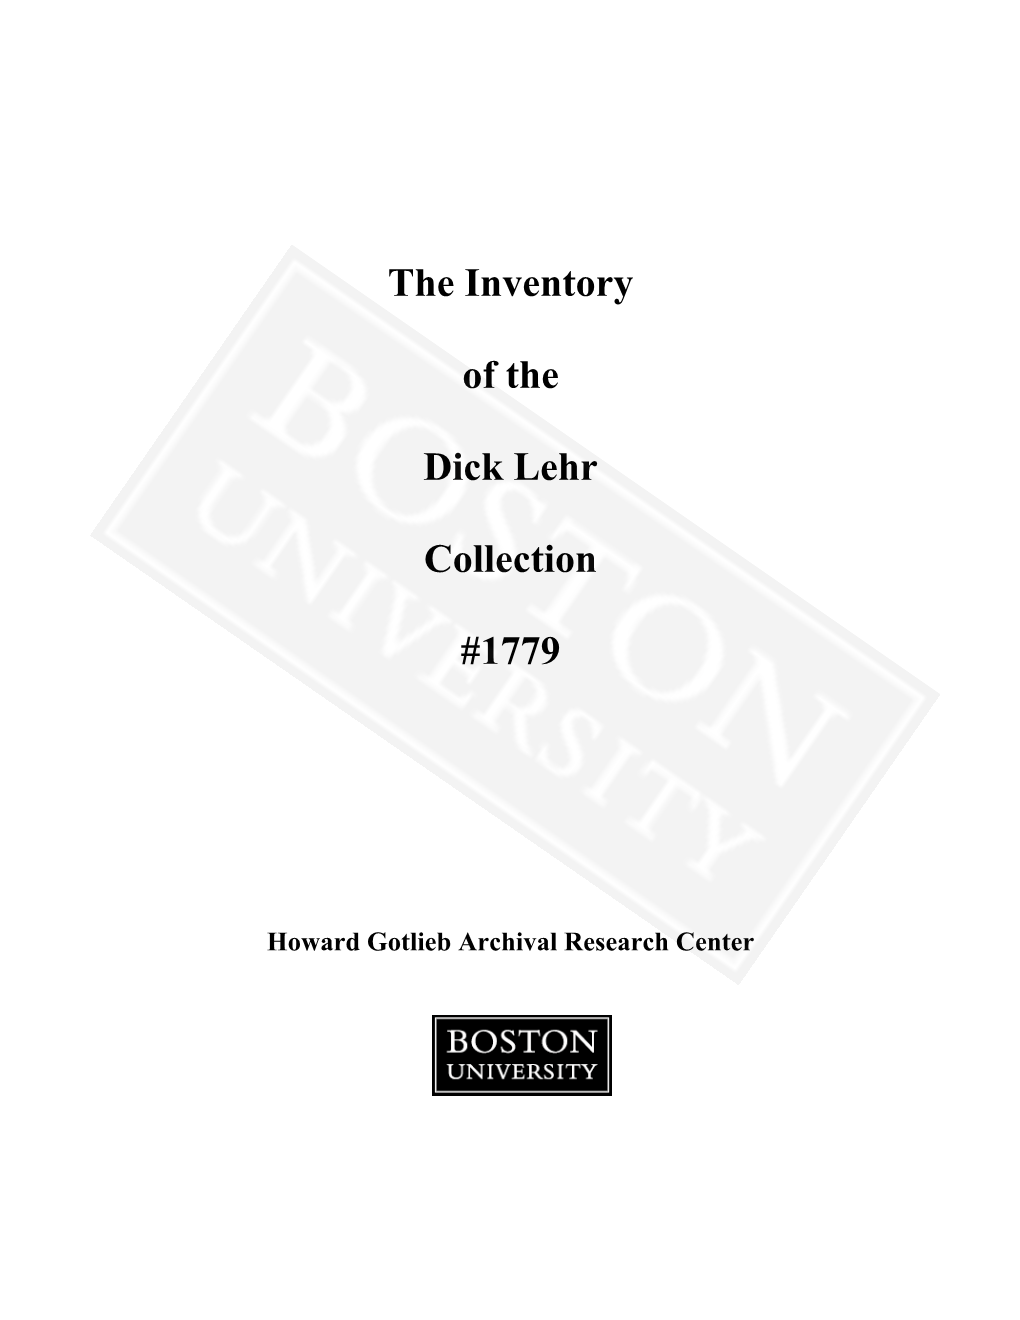 The Inventory of the Dick Lehr Collection #1779